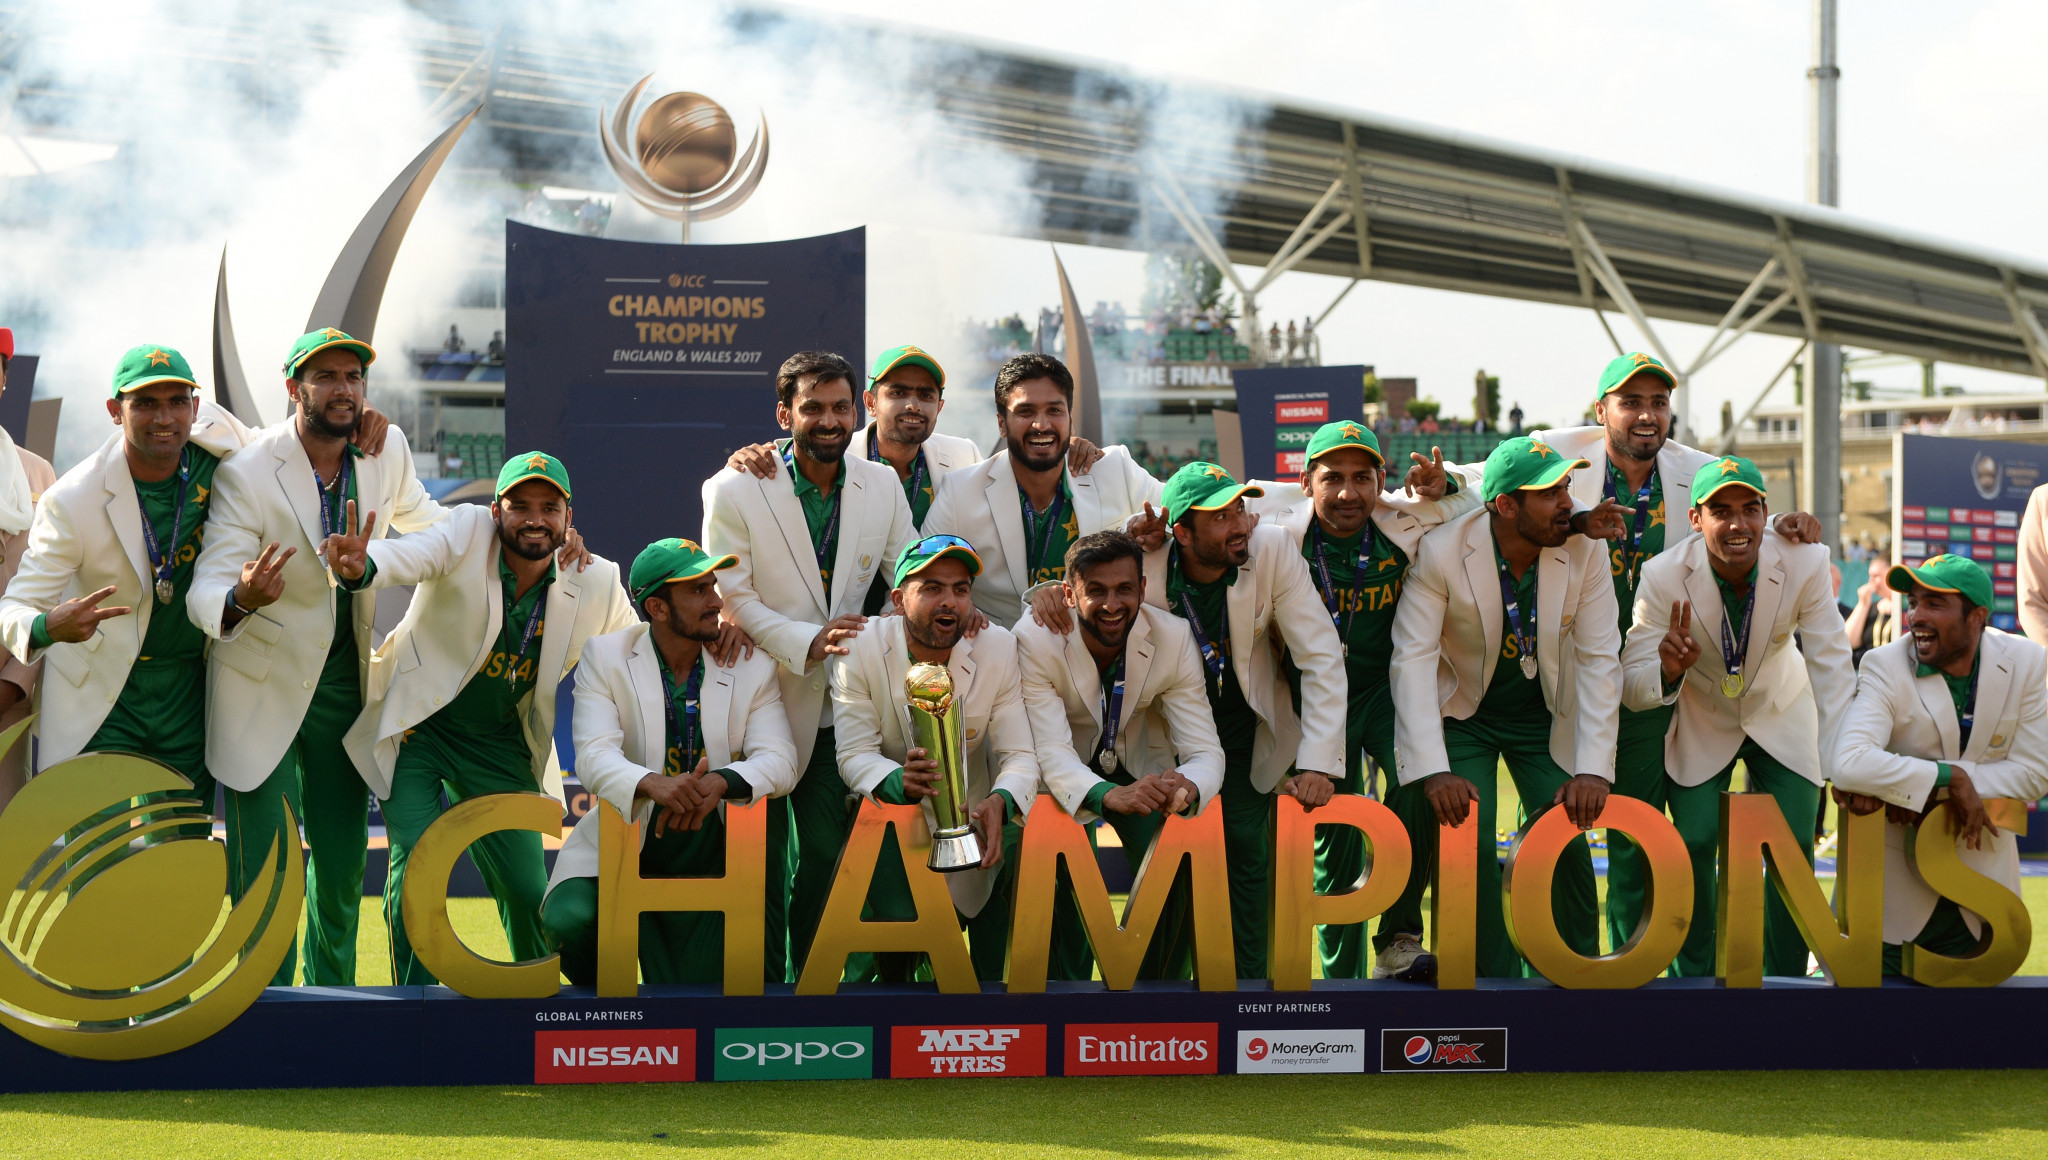 The 2025 Champions Trophy will be the first ICC event to be staged in Pakistan since the 1996 World Cup ©Getty Images